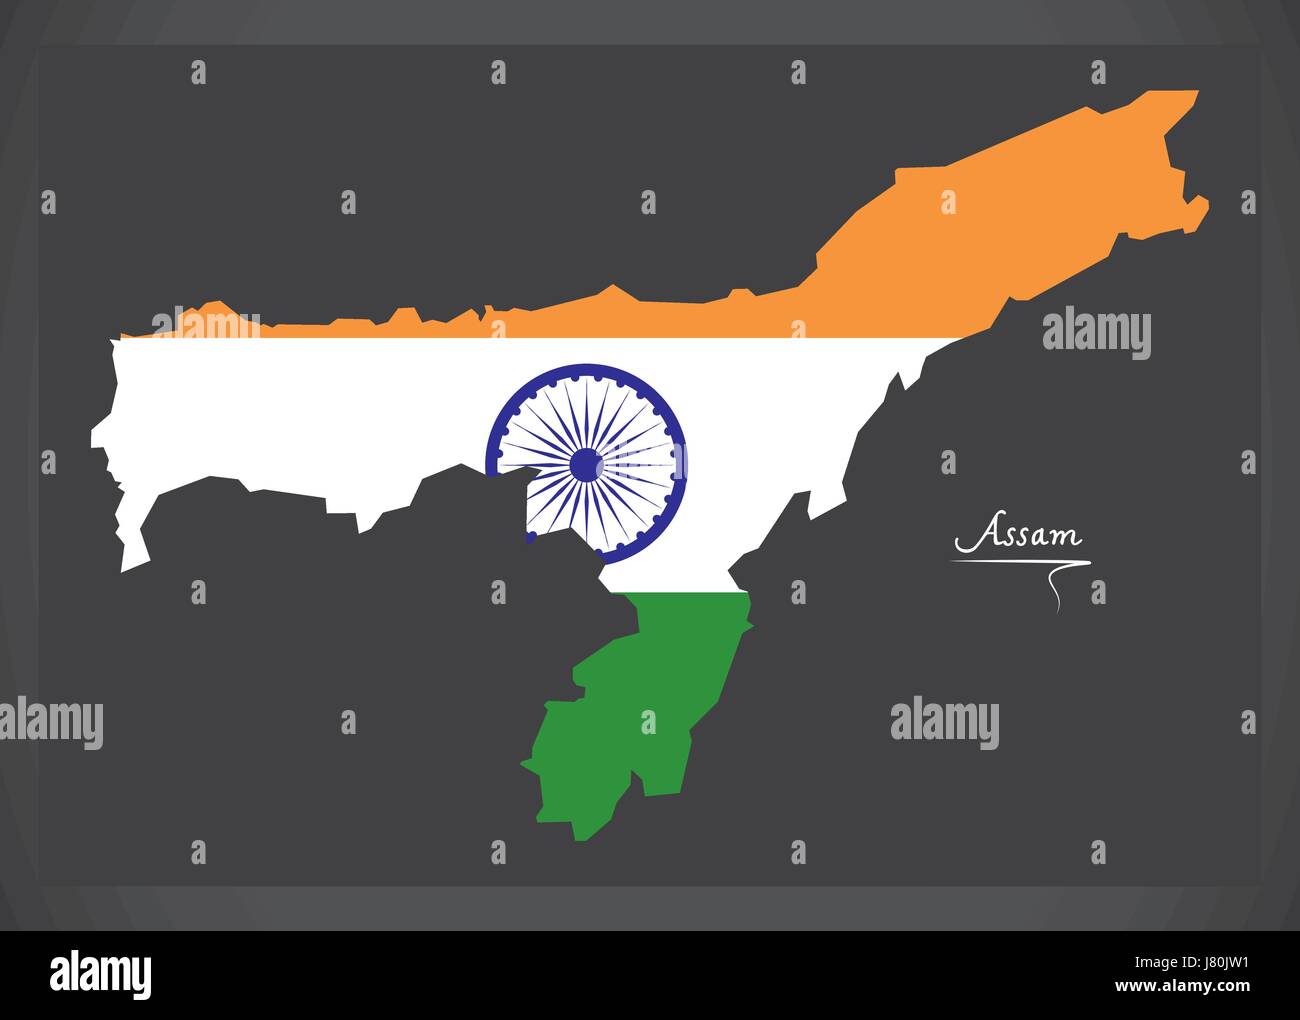 English: This is a staggering wall size map of India and Ceylon